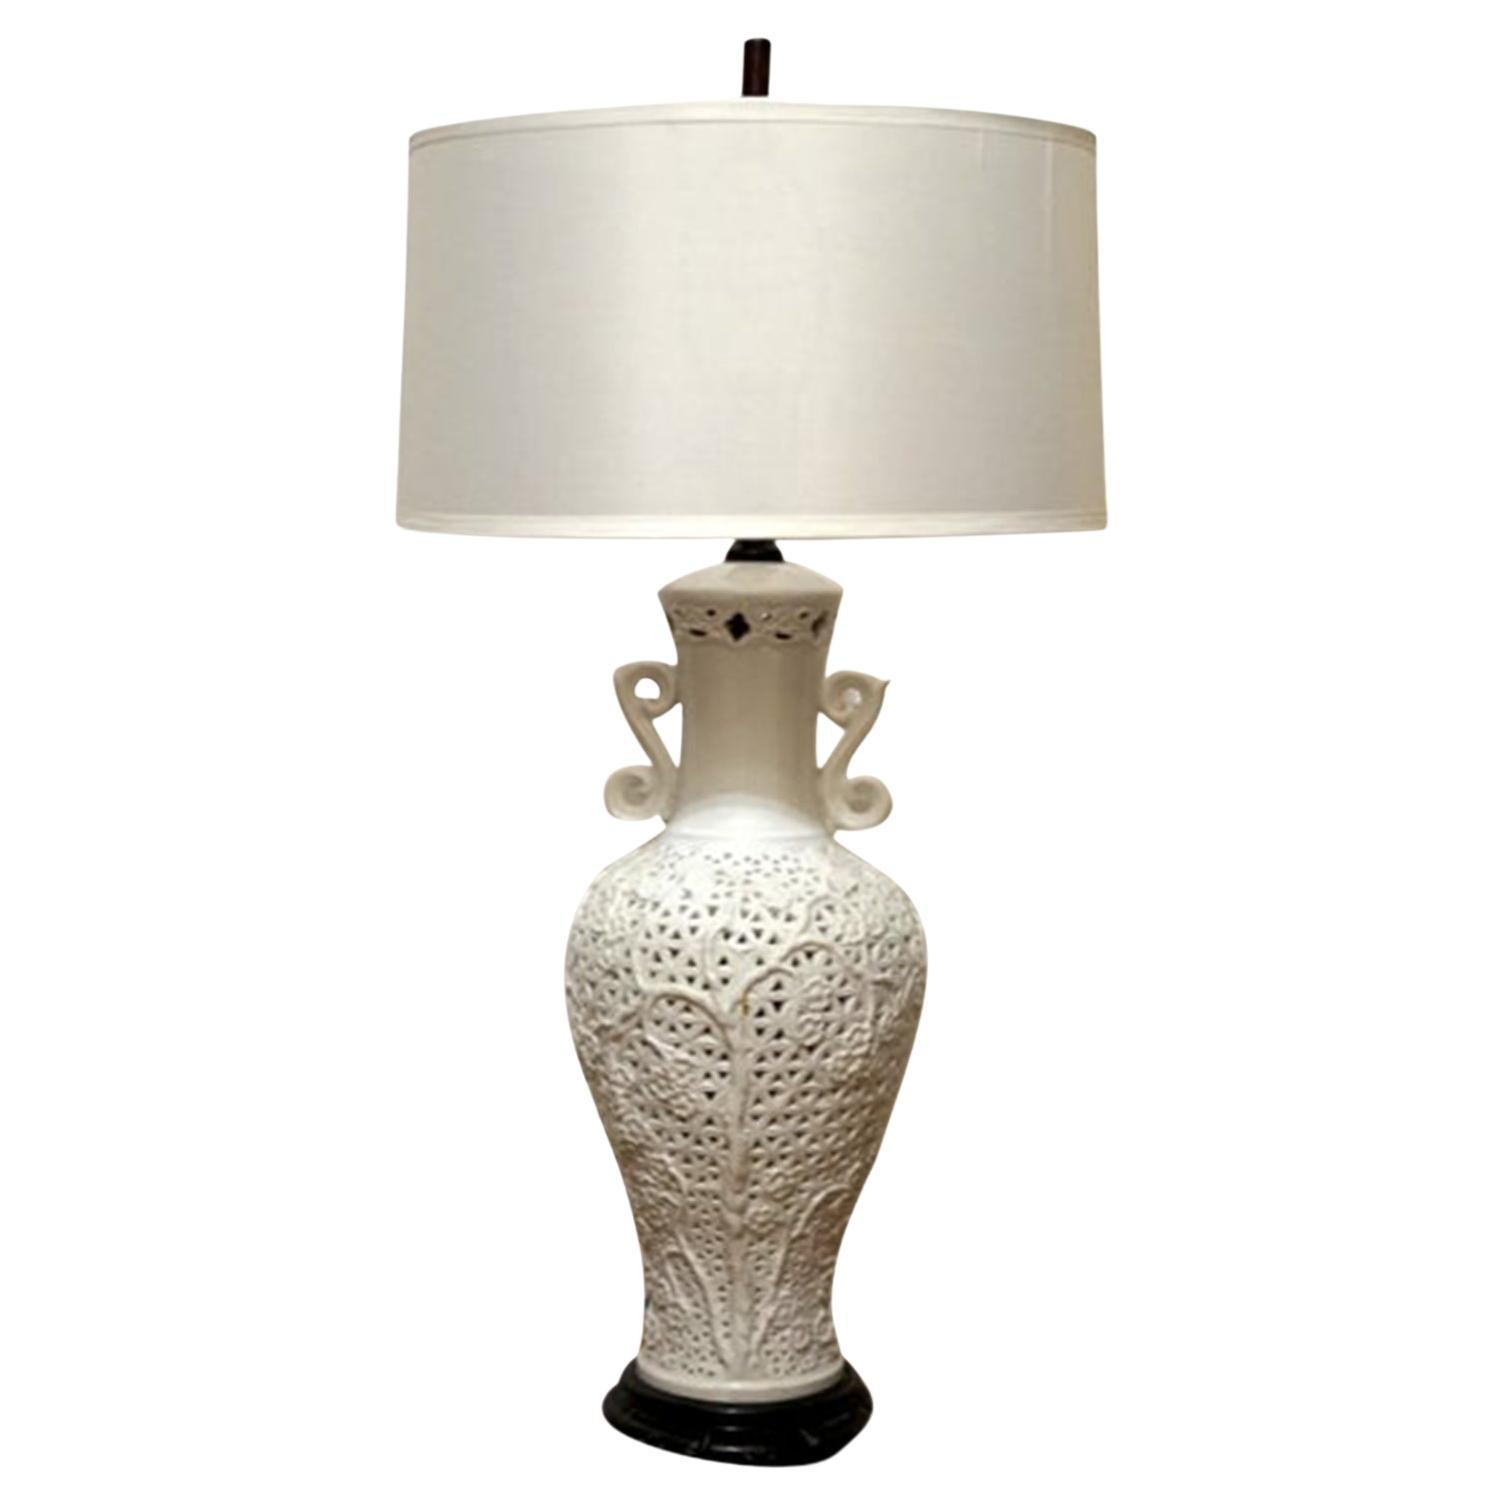 Vintage White Blanc de Chine Baluster form Pierced Table Lamp and Shade